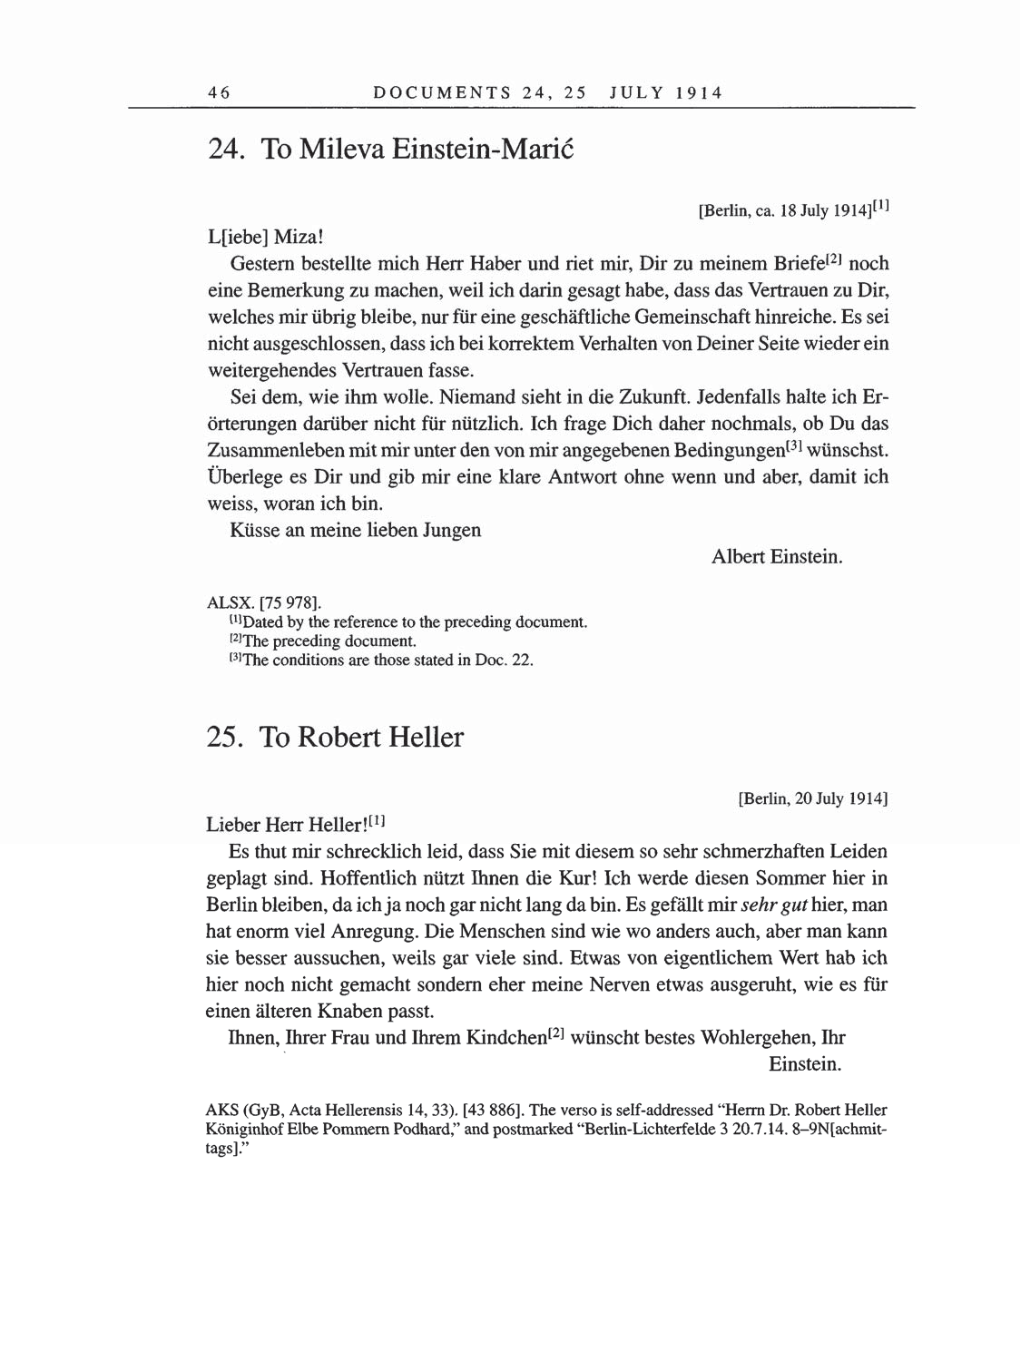 Volume 8, Part A: The Berlin Years: Correspondence 1914-1917 page 46